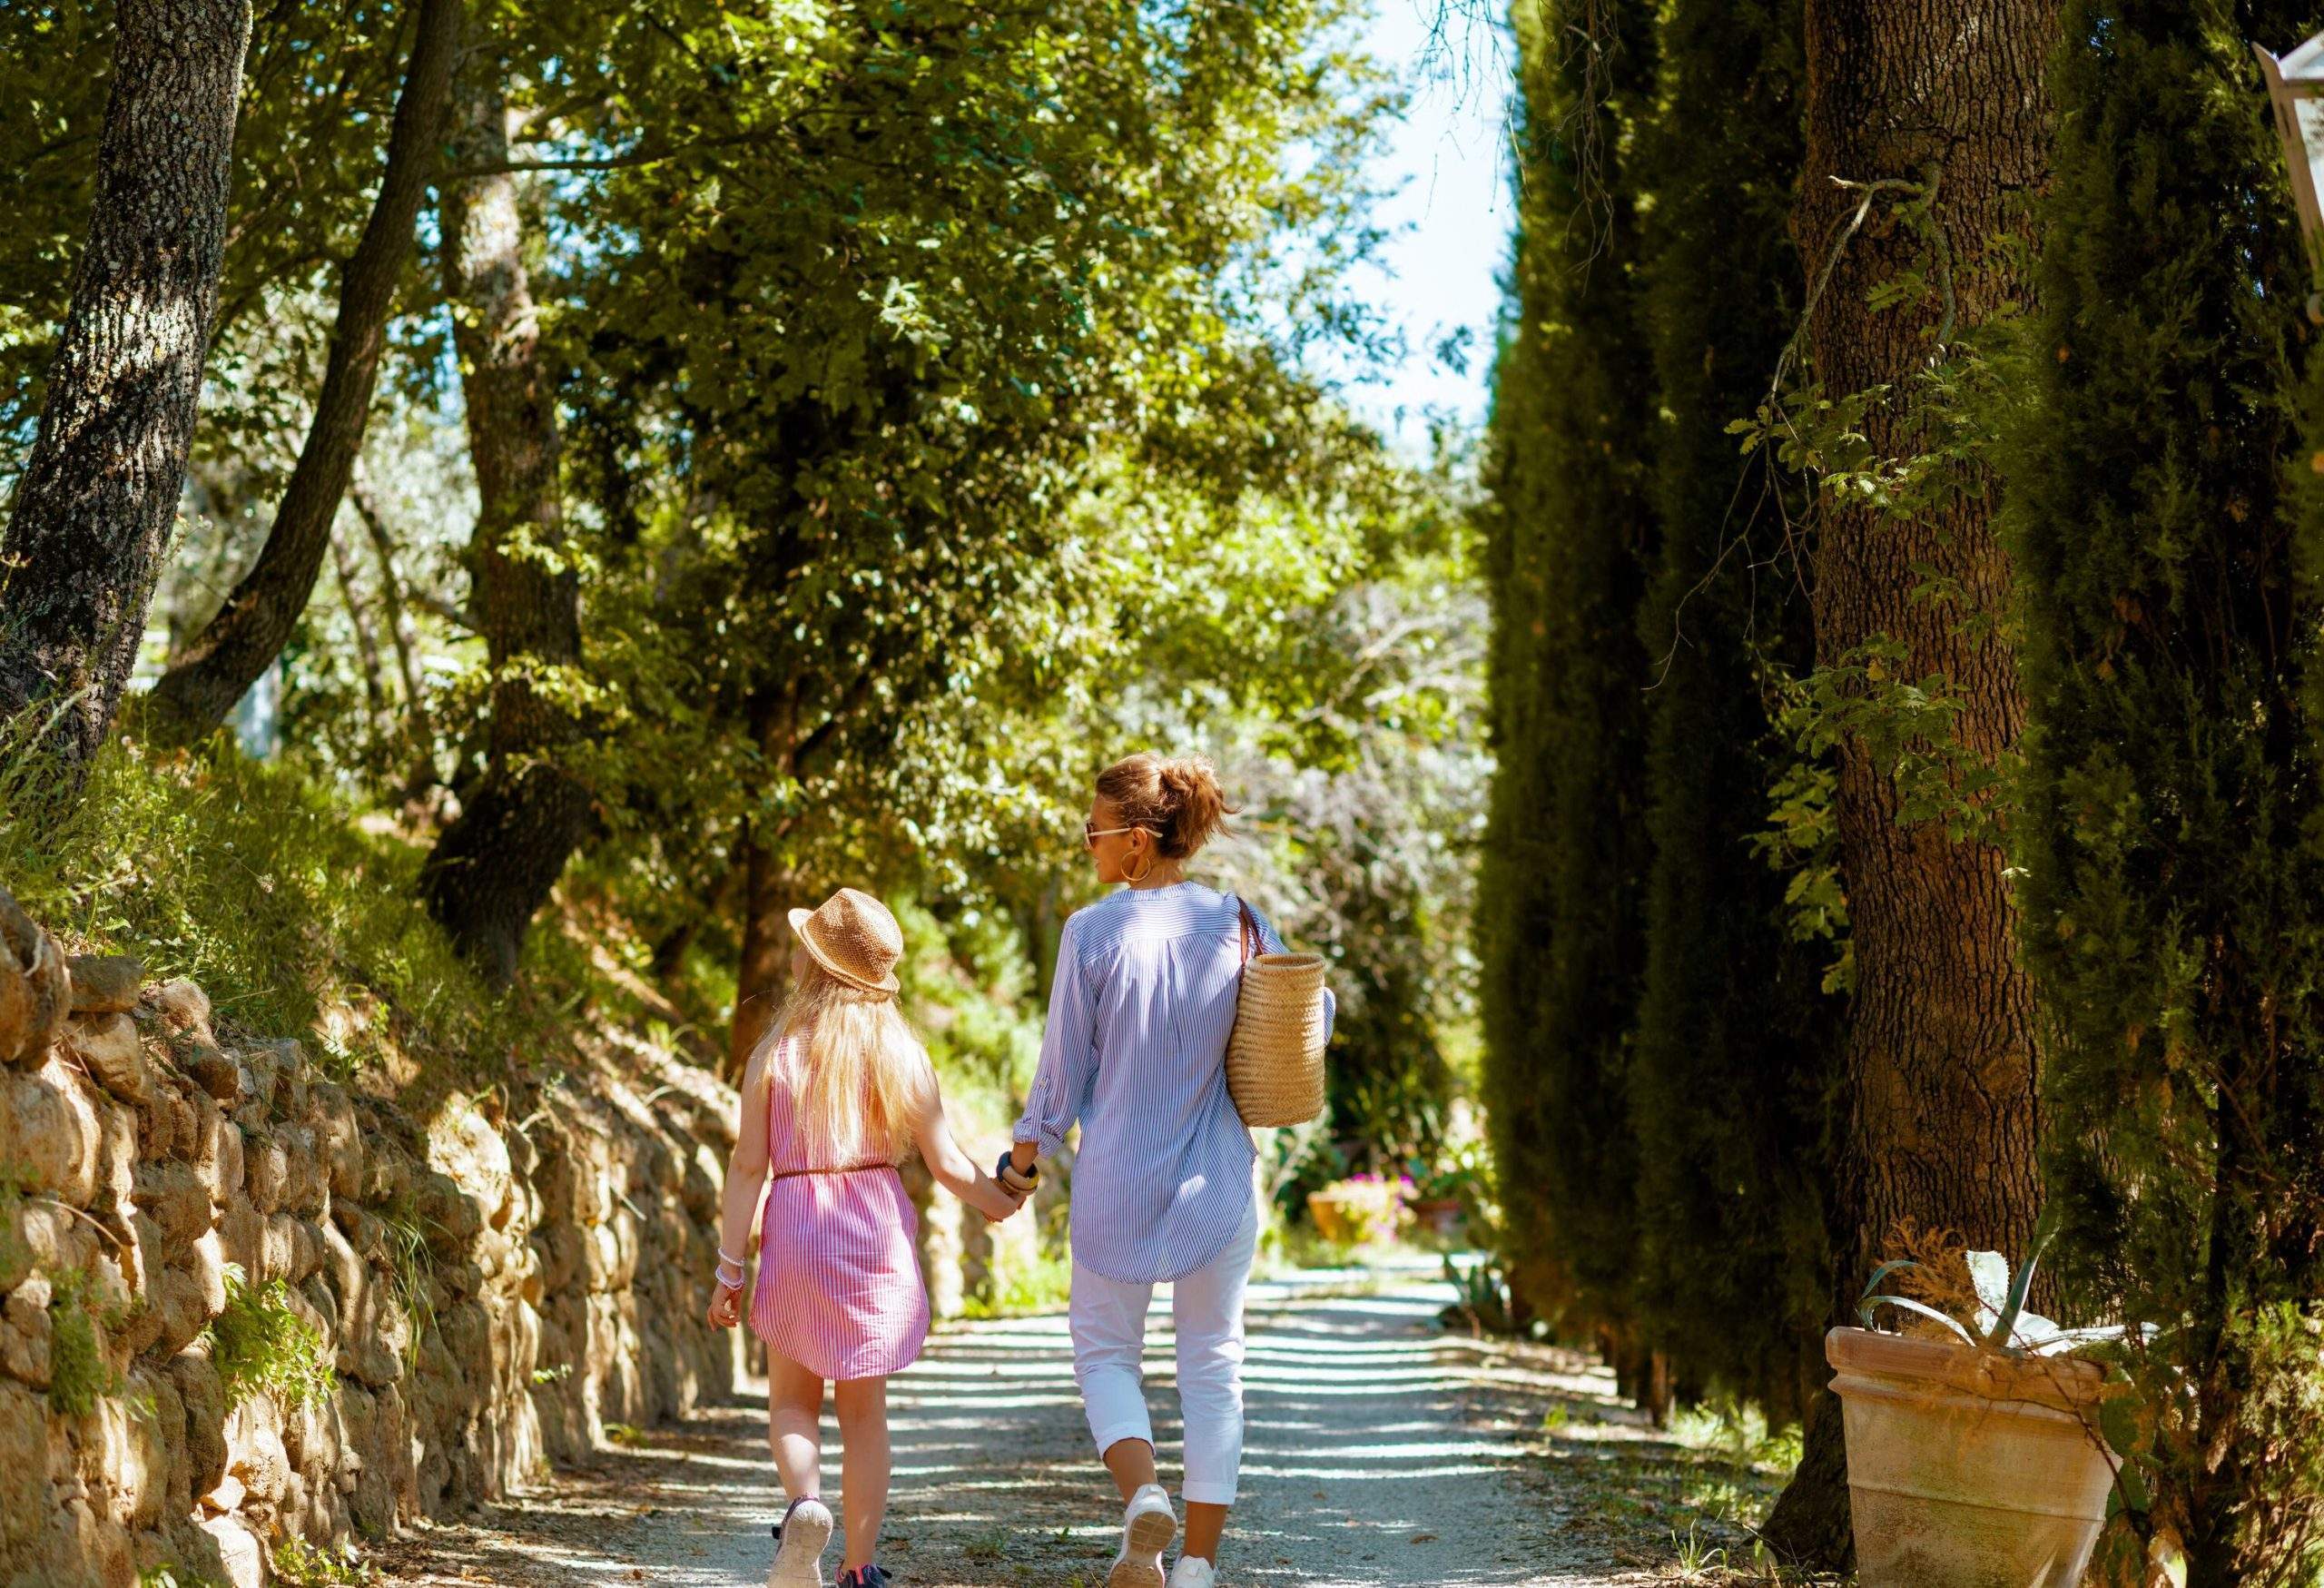 A woman and a girl hold hands as they stroll along a path in the shade of trees.